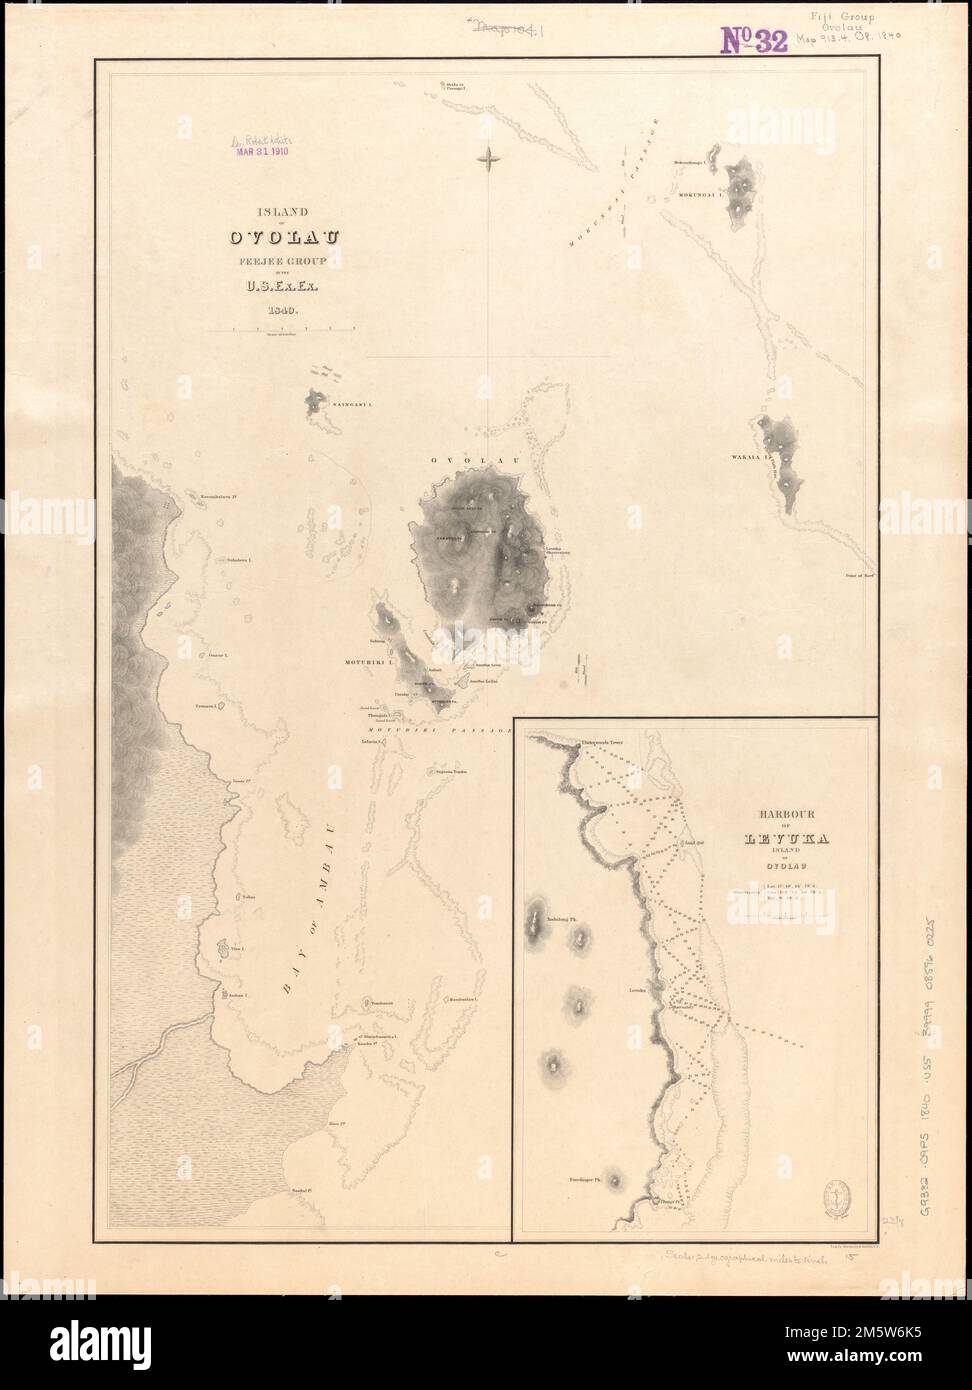 Island of Ovolau, Feejee Group. Relief shown by hachures. Depths shown pictorially. Published in Narrative of the United States Exploring Expedition : during the years 1838, 1839, 1840, 1841, 1842. Inset: Harbour of Levuka Island, Island of Ovolau.... , Fiji  , Lomaiviti  ,province   , Ovalau Island  ,island Stock Photo